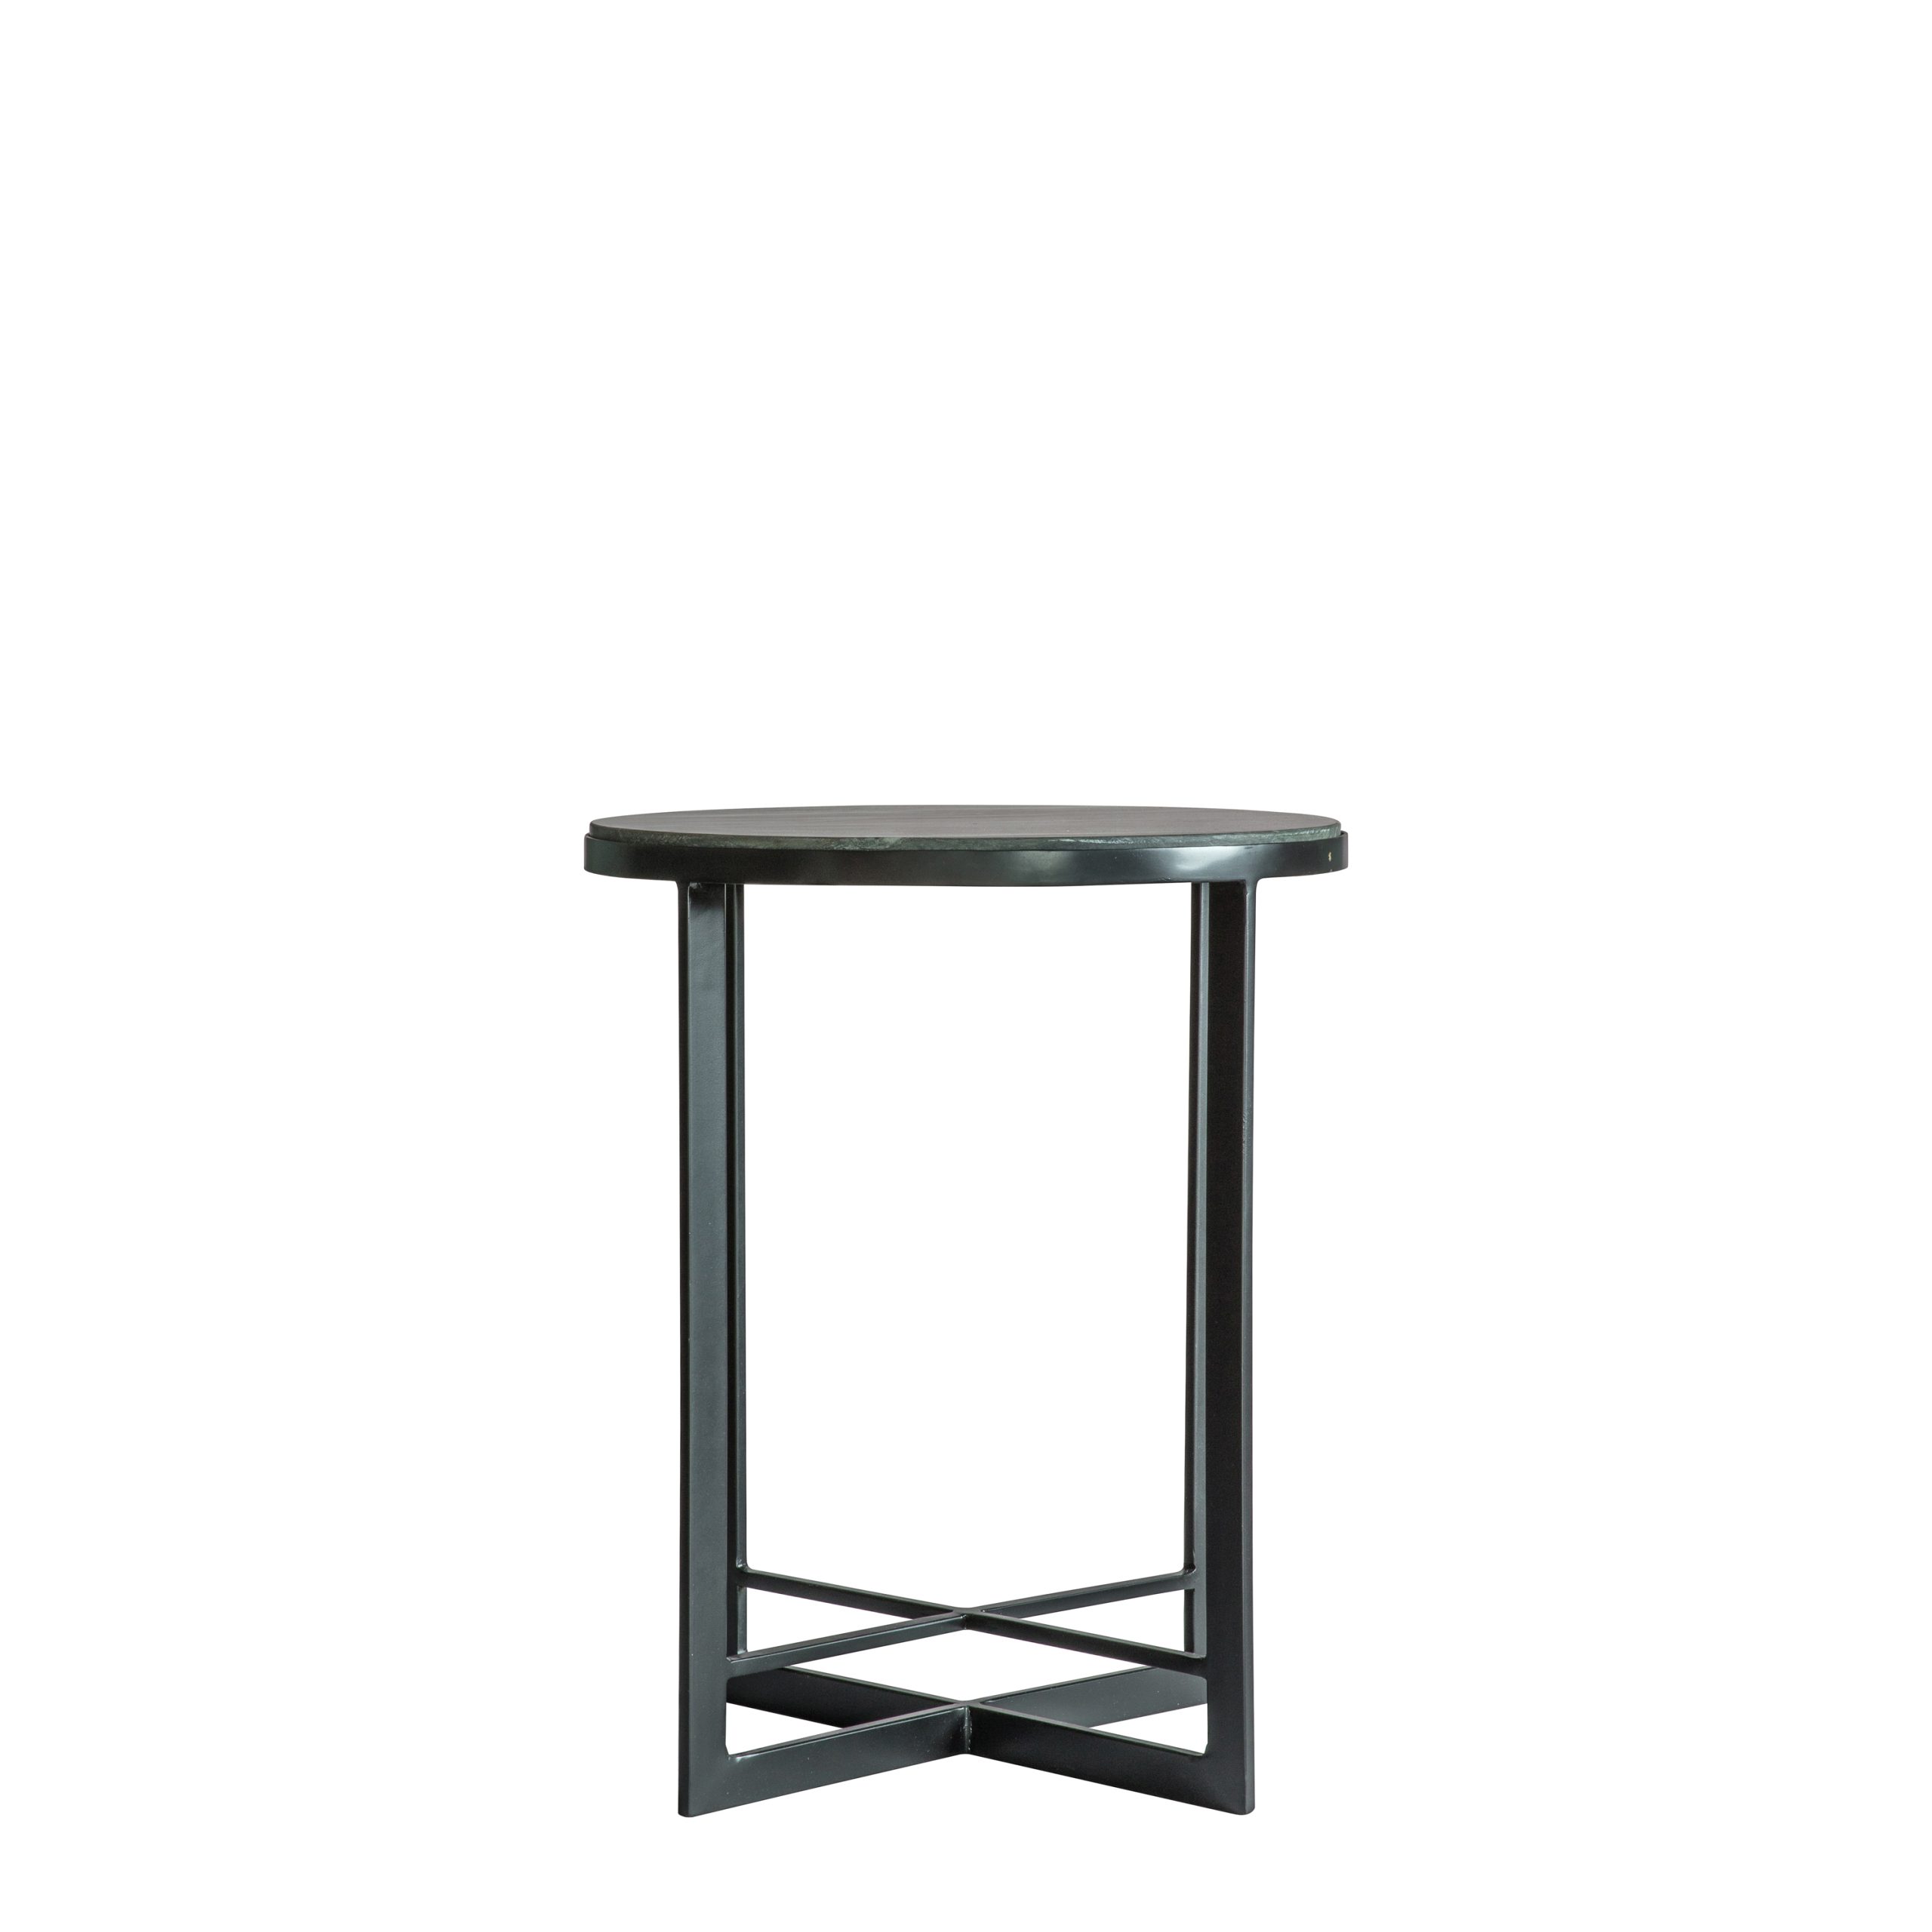 Gallery Direct Necton Side Table Black